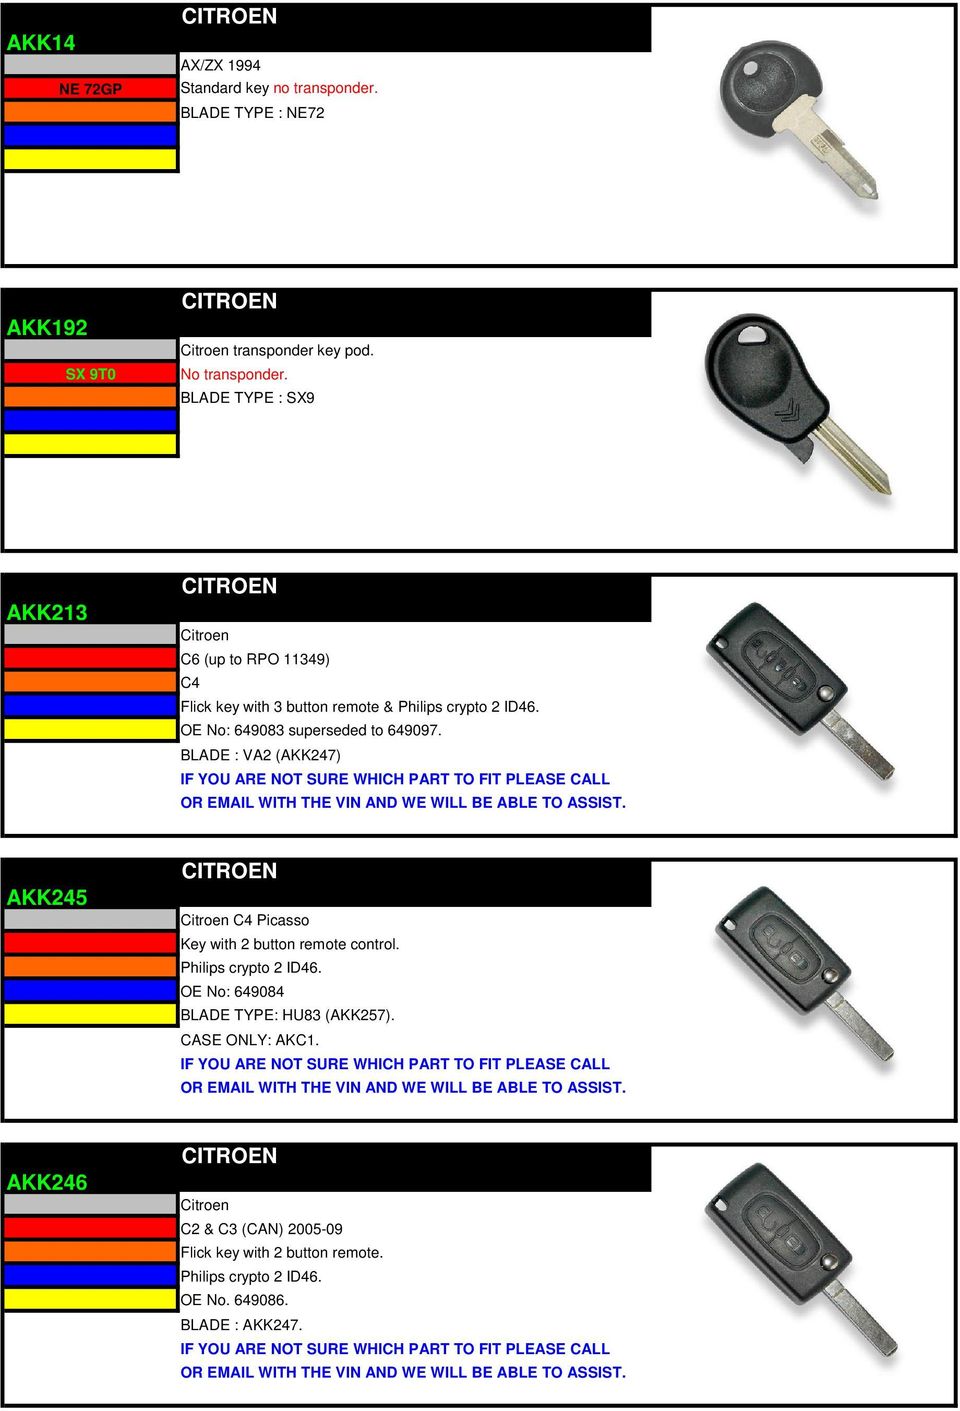 BLADE : VA2 (AKK247) IF YOU ARE NOT SURE WHICH PART TO FIT PLEASE CALL OR EMAIL WITH THE VIN AND WE WILL BE ABLE TO ASSIST. AKK245 CITROEN Citroen C4 Picasso Key with 2 button remote control.